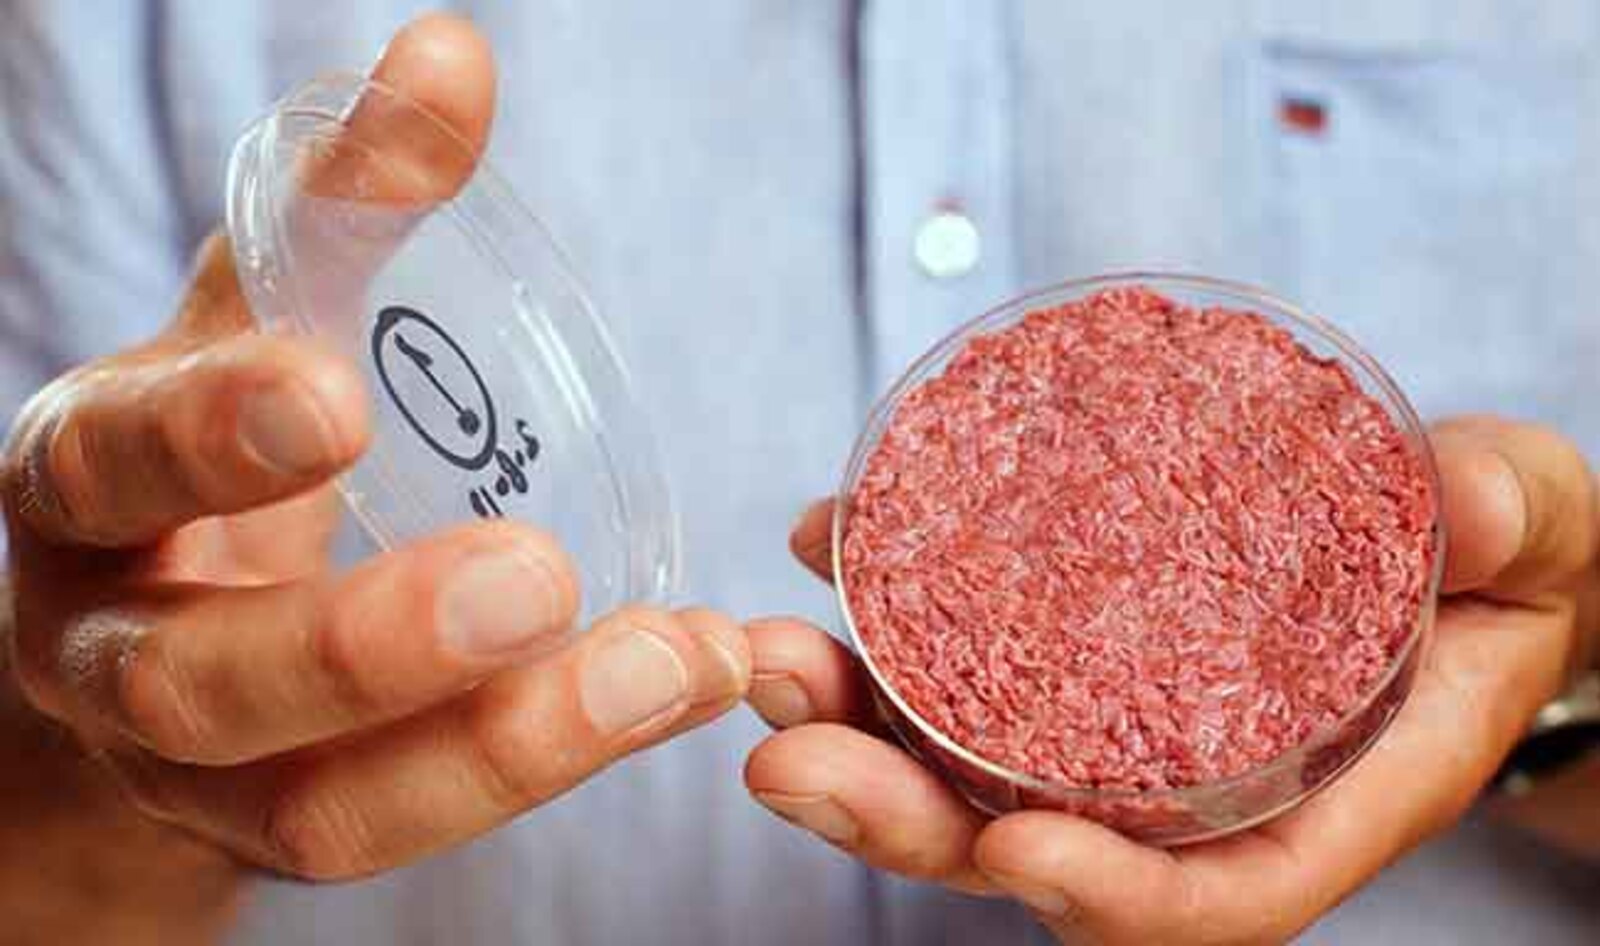 USDA and FDA to Host Joint Meeting On Cell-Based Meat Regulation